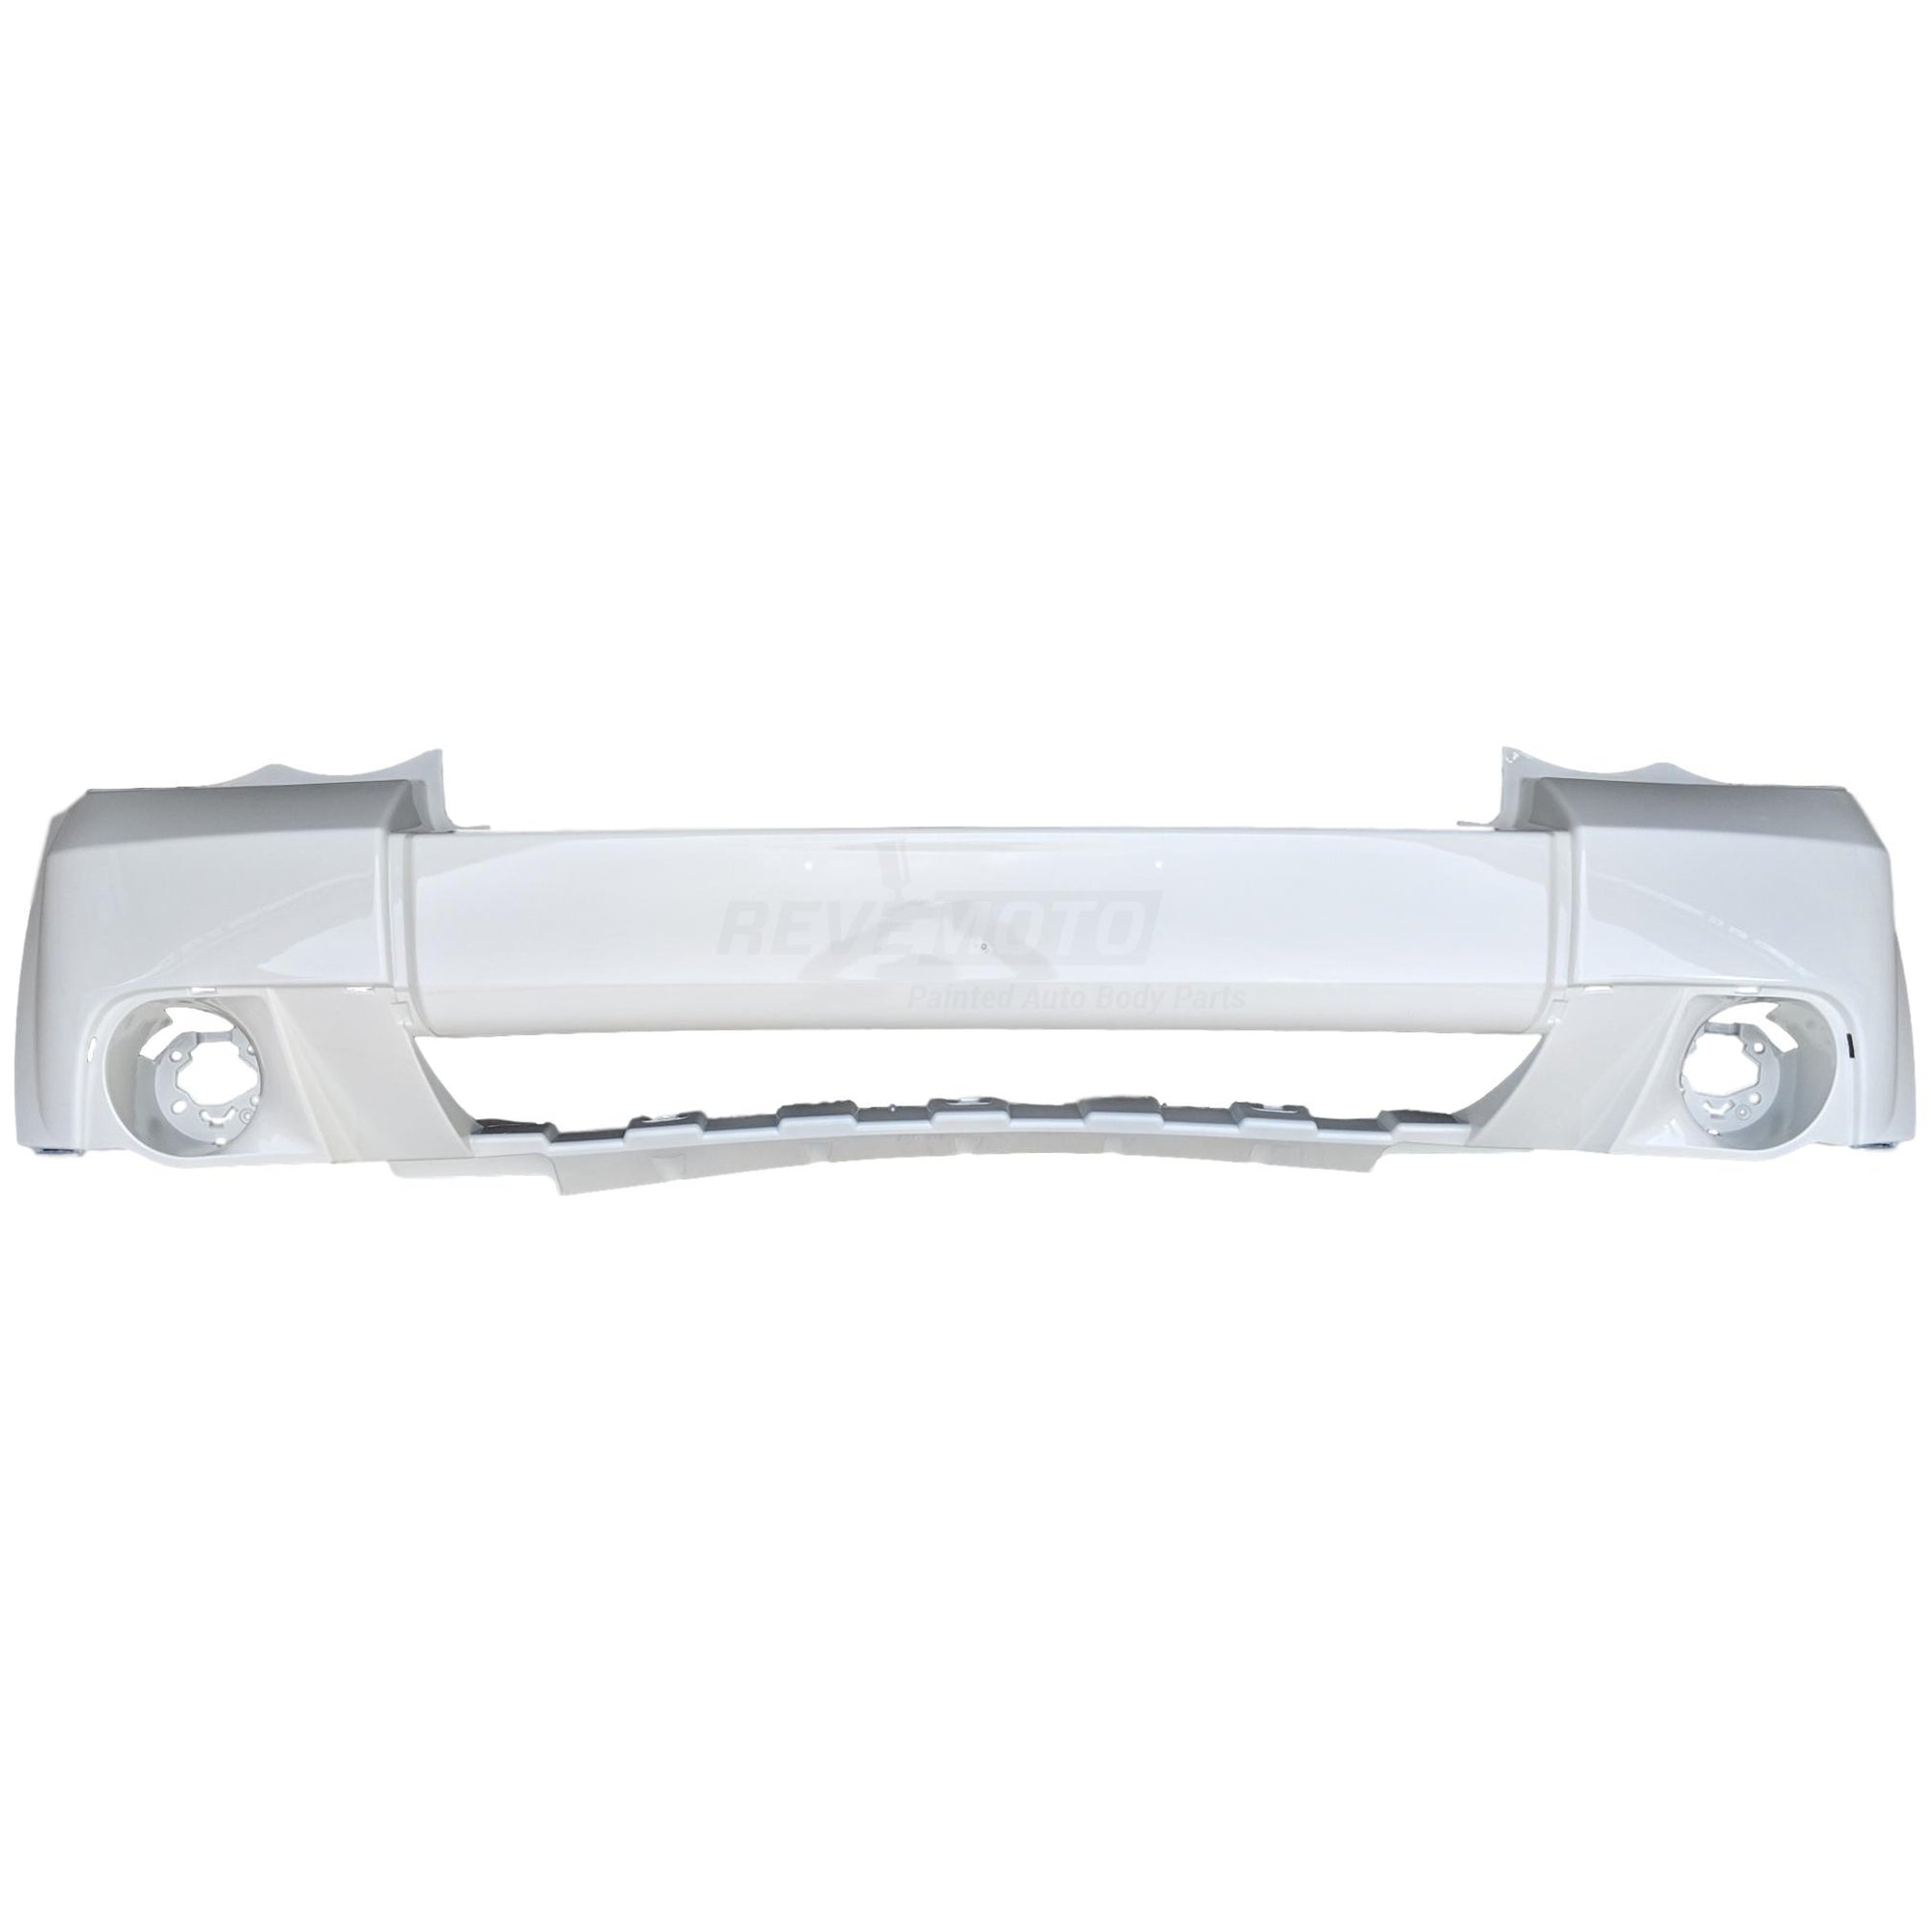 2009 Jeep Grand Cherokee Front Bumper, Laredo, Limited, Without Chrome Insert, Painted  Stone White (PW1) 68033744AB CH1000932